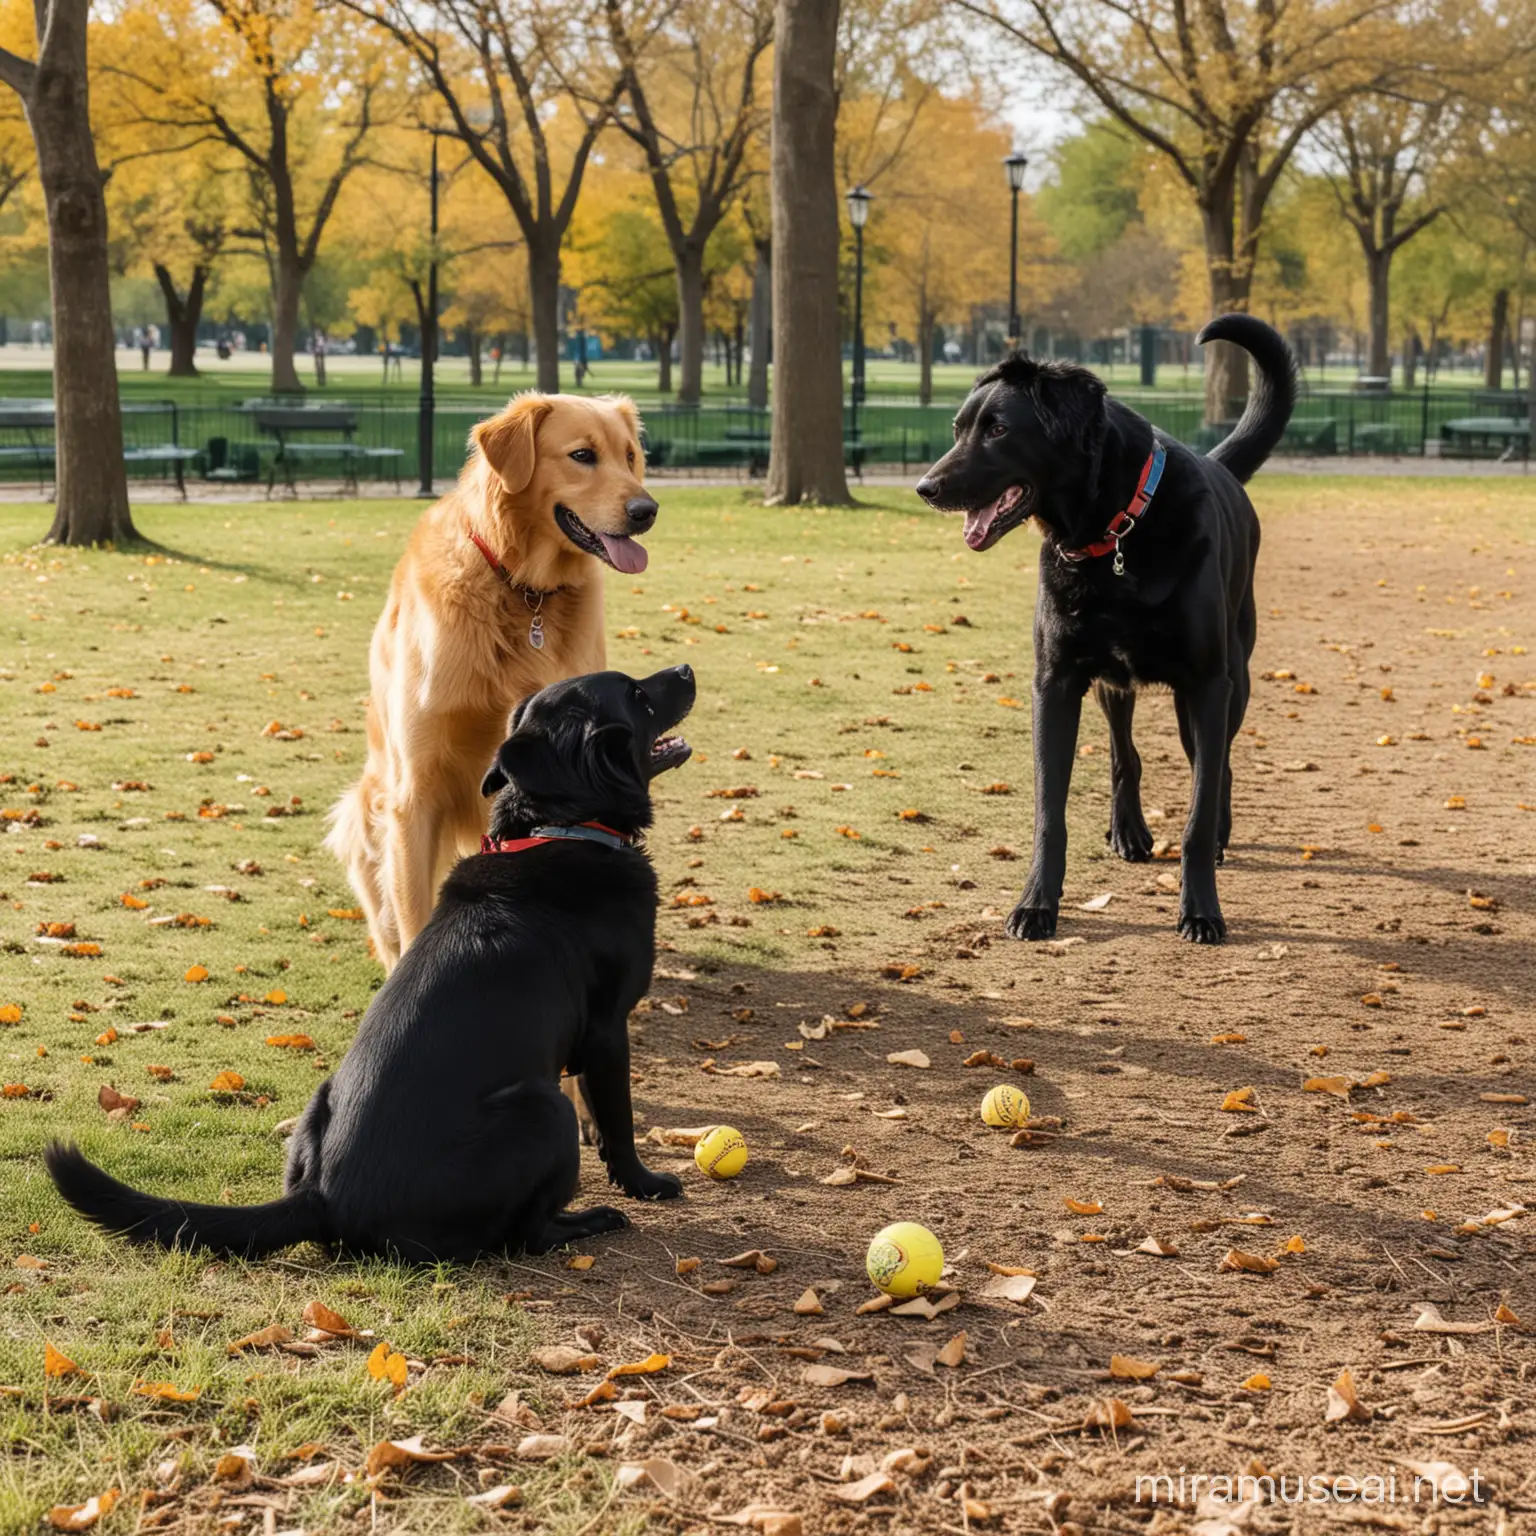 Golden and Black Dogs Playing Joyfully in the Park